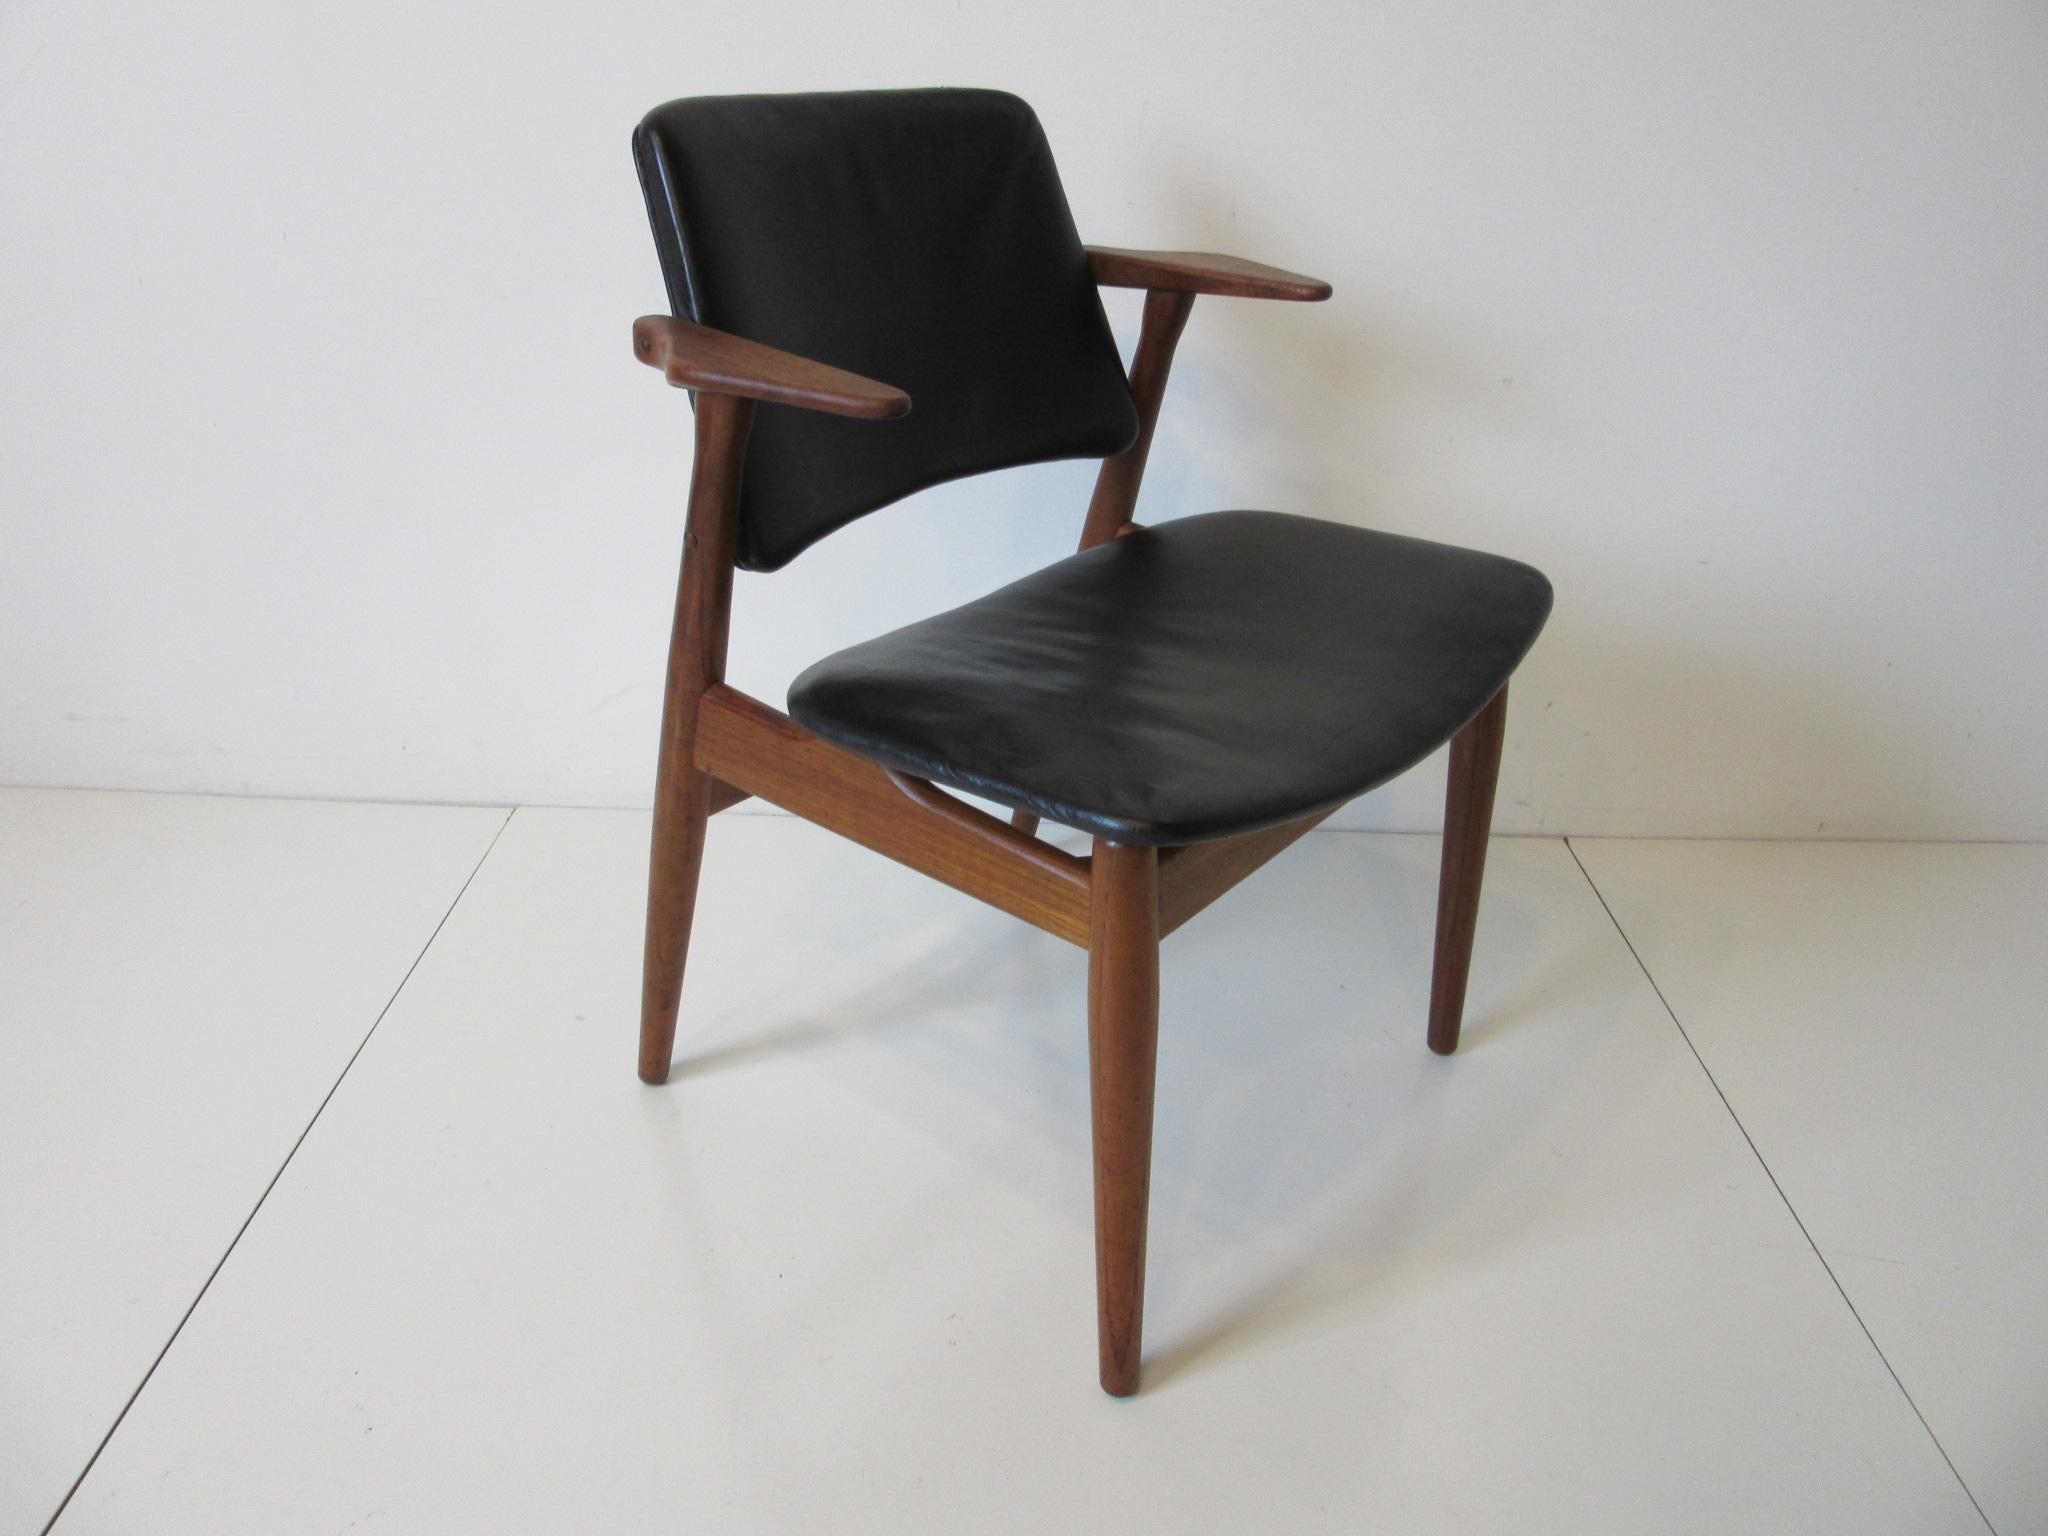 A dark teakwood chair with smaller upper arm rests and satin black leather seat and back rest still retains the original upholstery and manufactures branded mark. George Tanier Selections - Helge Sibast Made in Denmark makes a great living area or